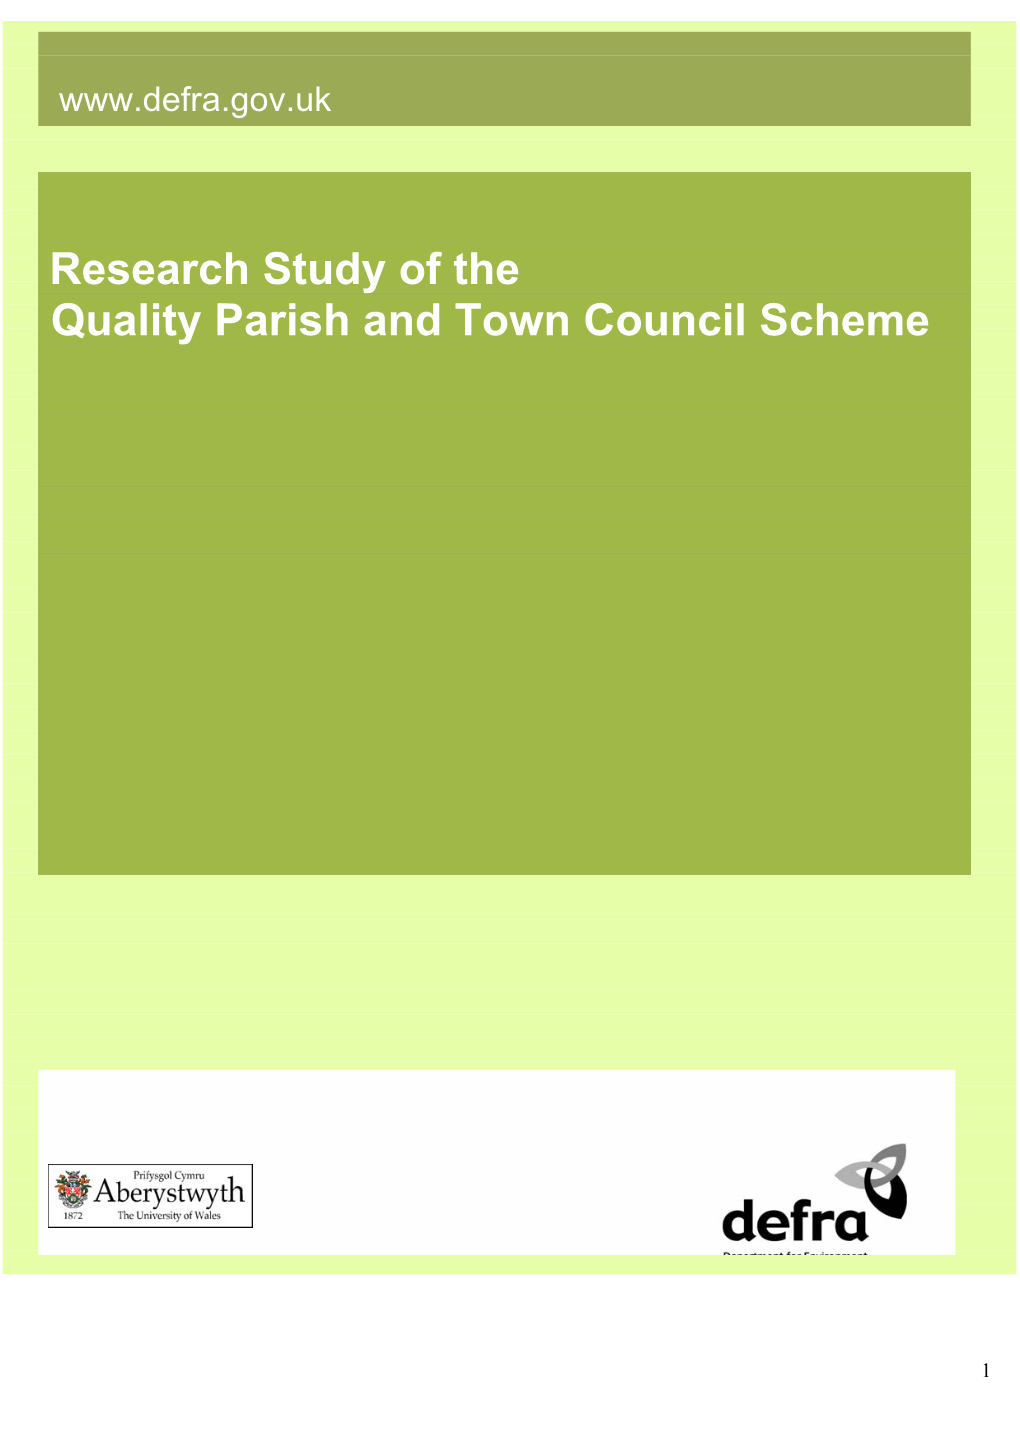 Review of the Quality Parish and Town Council Scheme